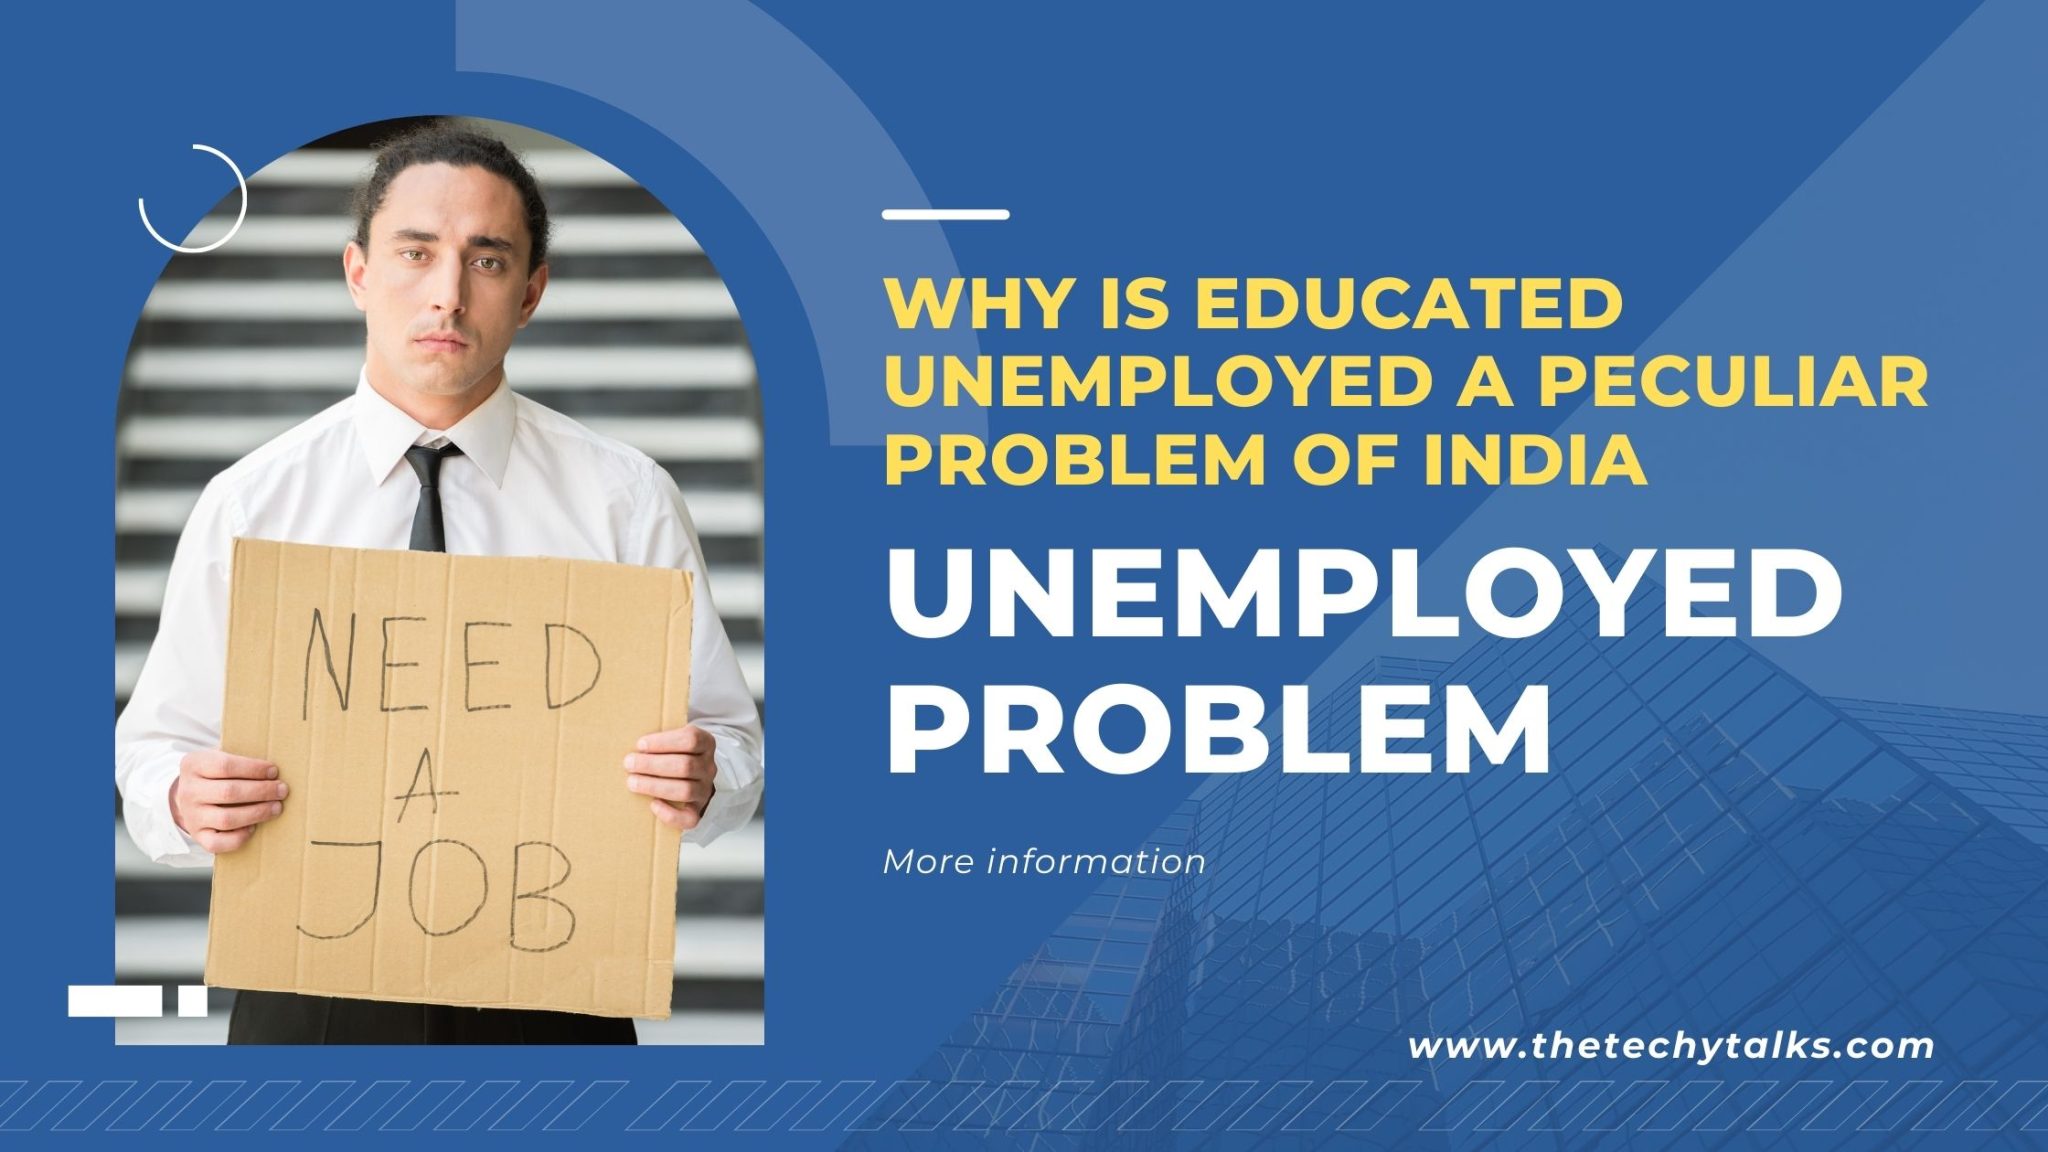 Why is Educated Unemployed a Peculiar Problem of India